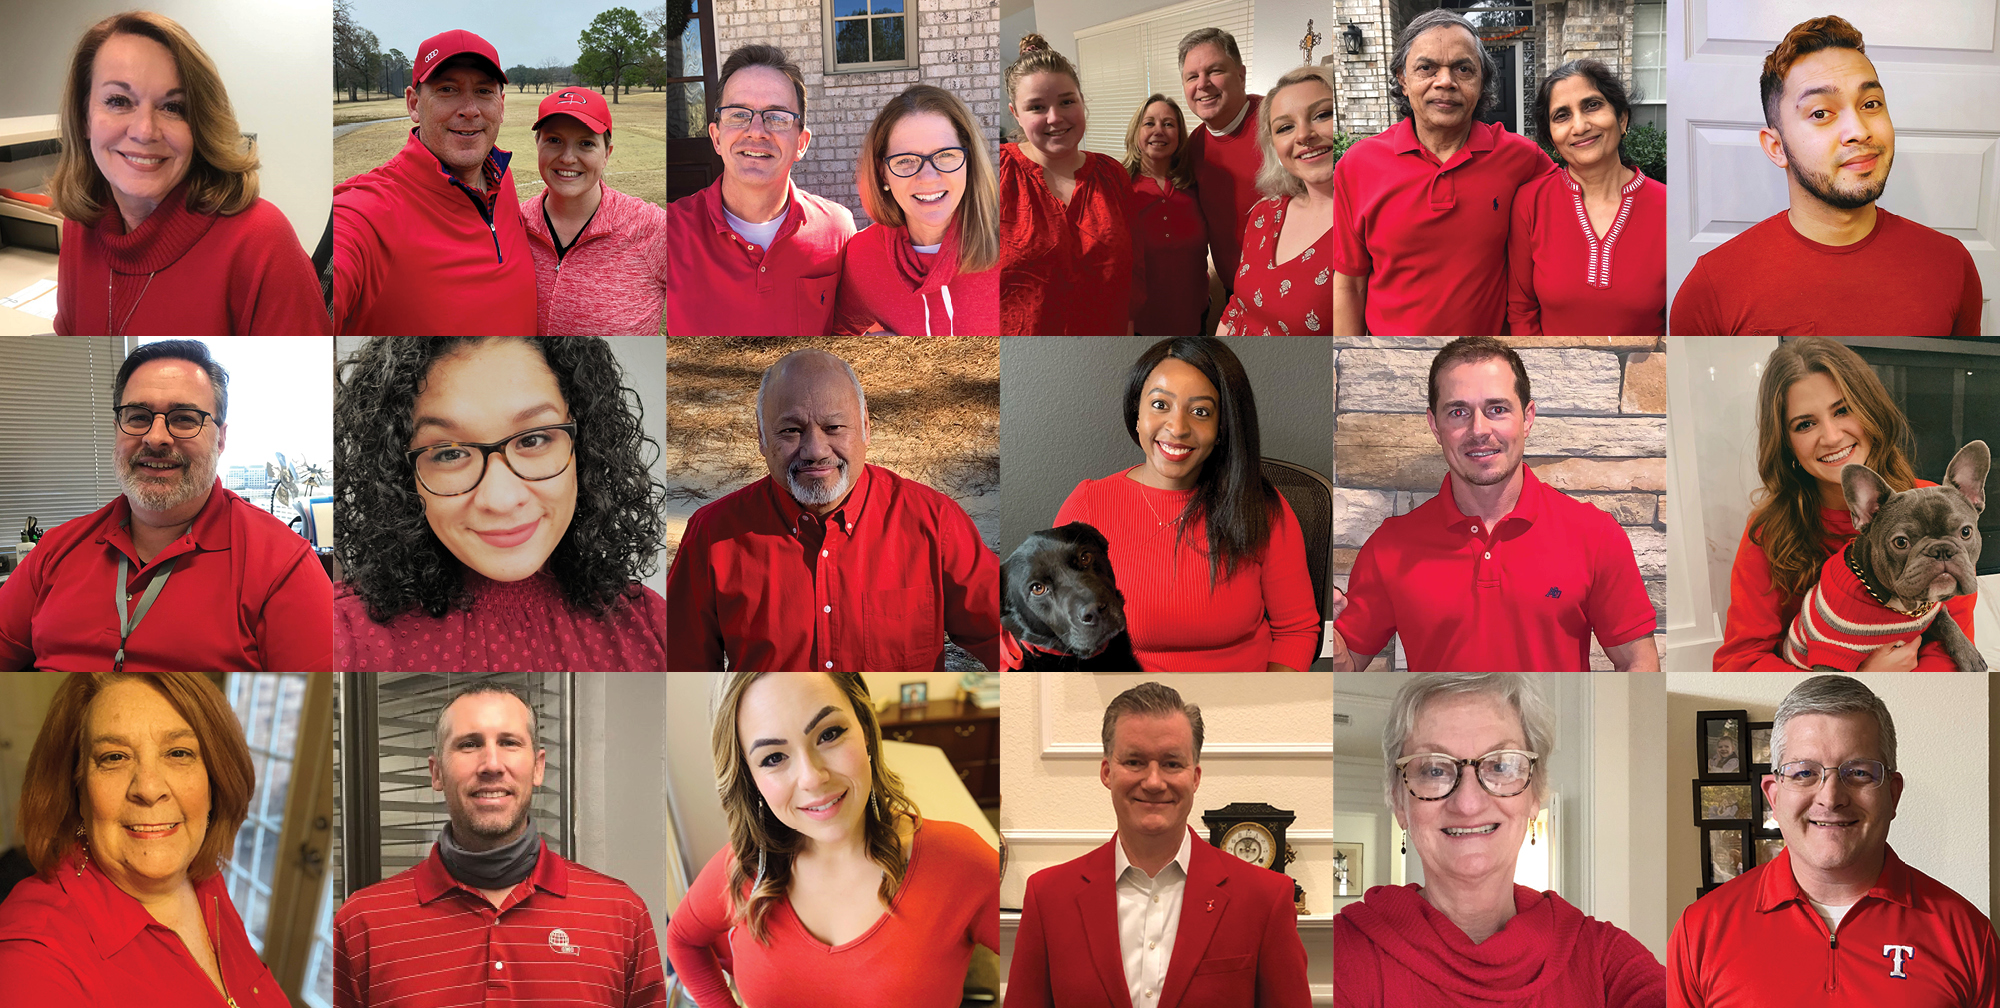 AMERICAN HEART ASSOCIATION Employees all wearing red